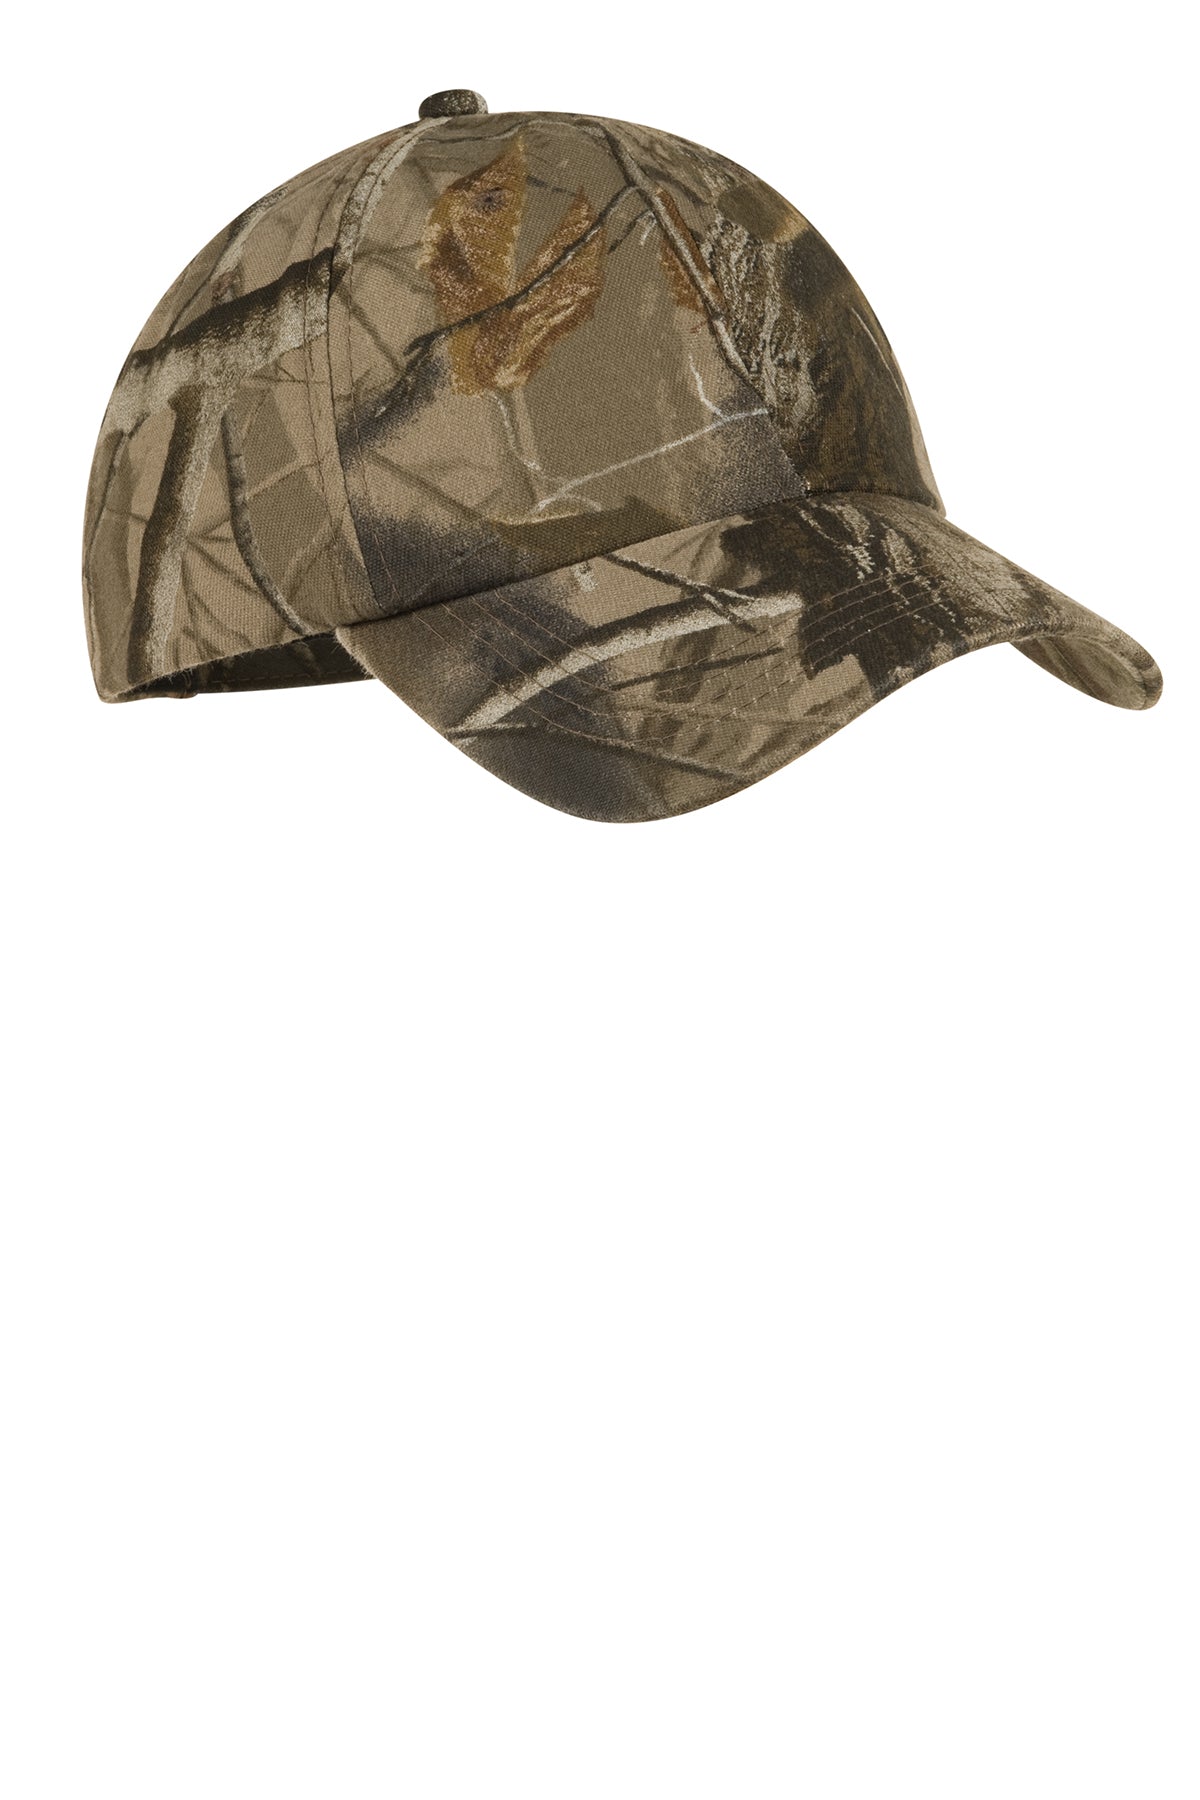 Port Authority Pro Camouflage Series Garment-Washed Cap C871 Realtree Hardwoods